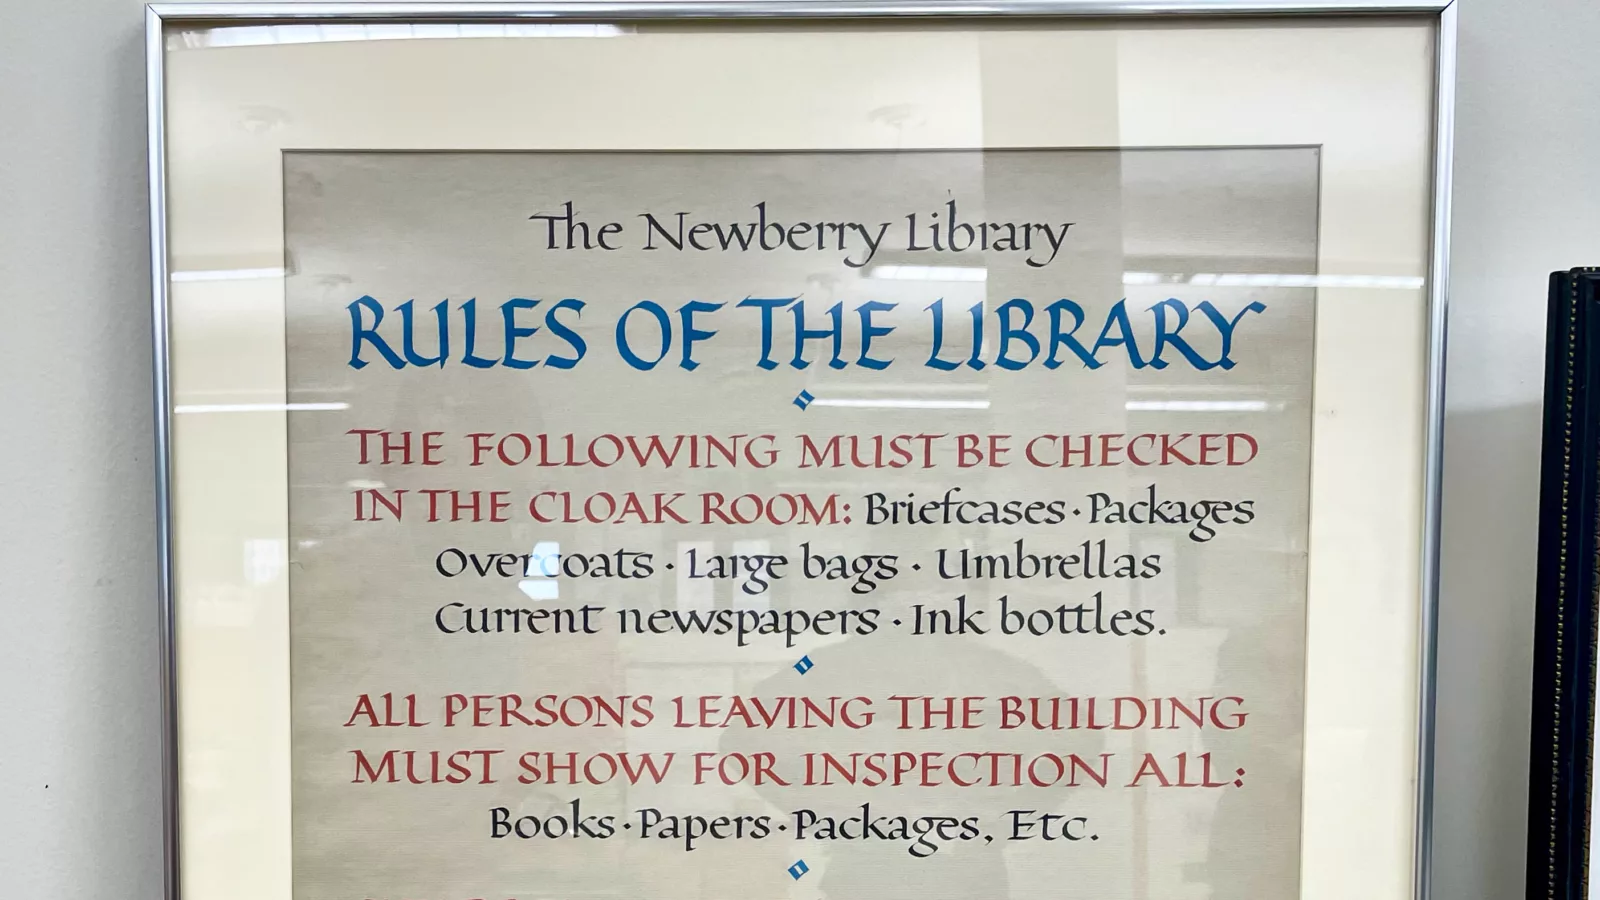 “Rules of the Library” sign made by James Hayes, ca. 1950s.